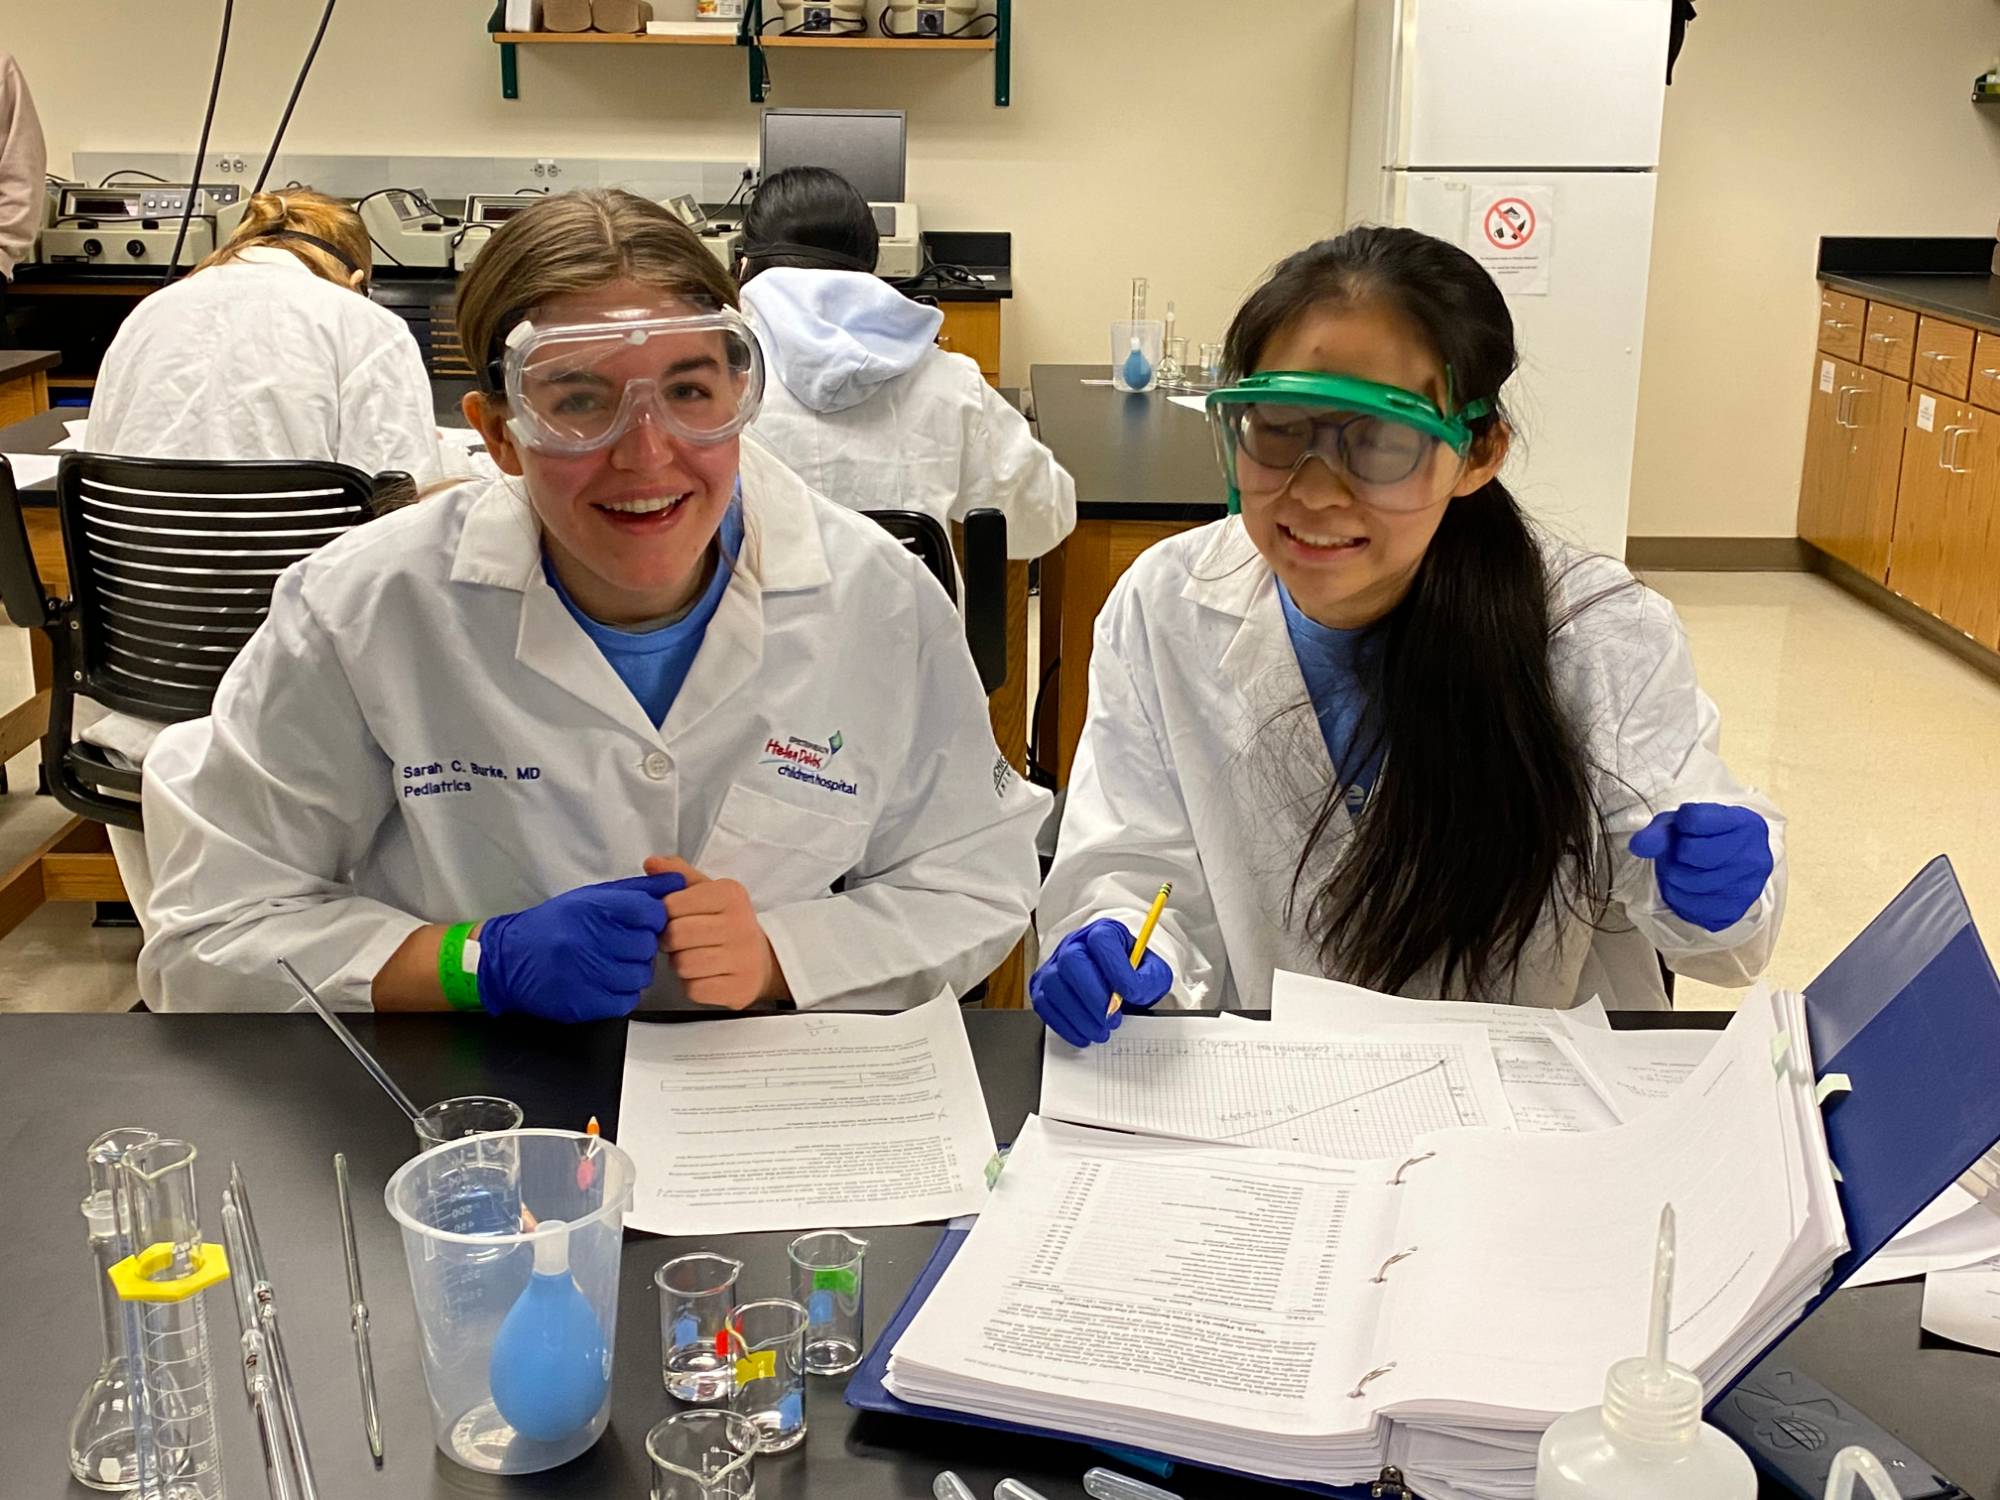 Girls competing in chemistry lab